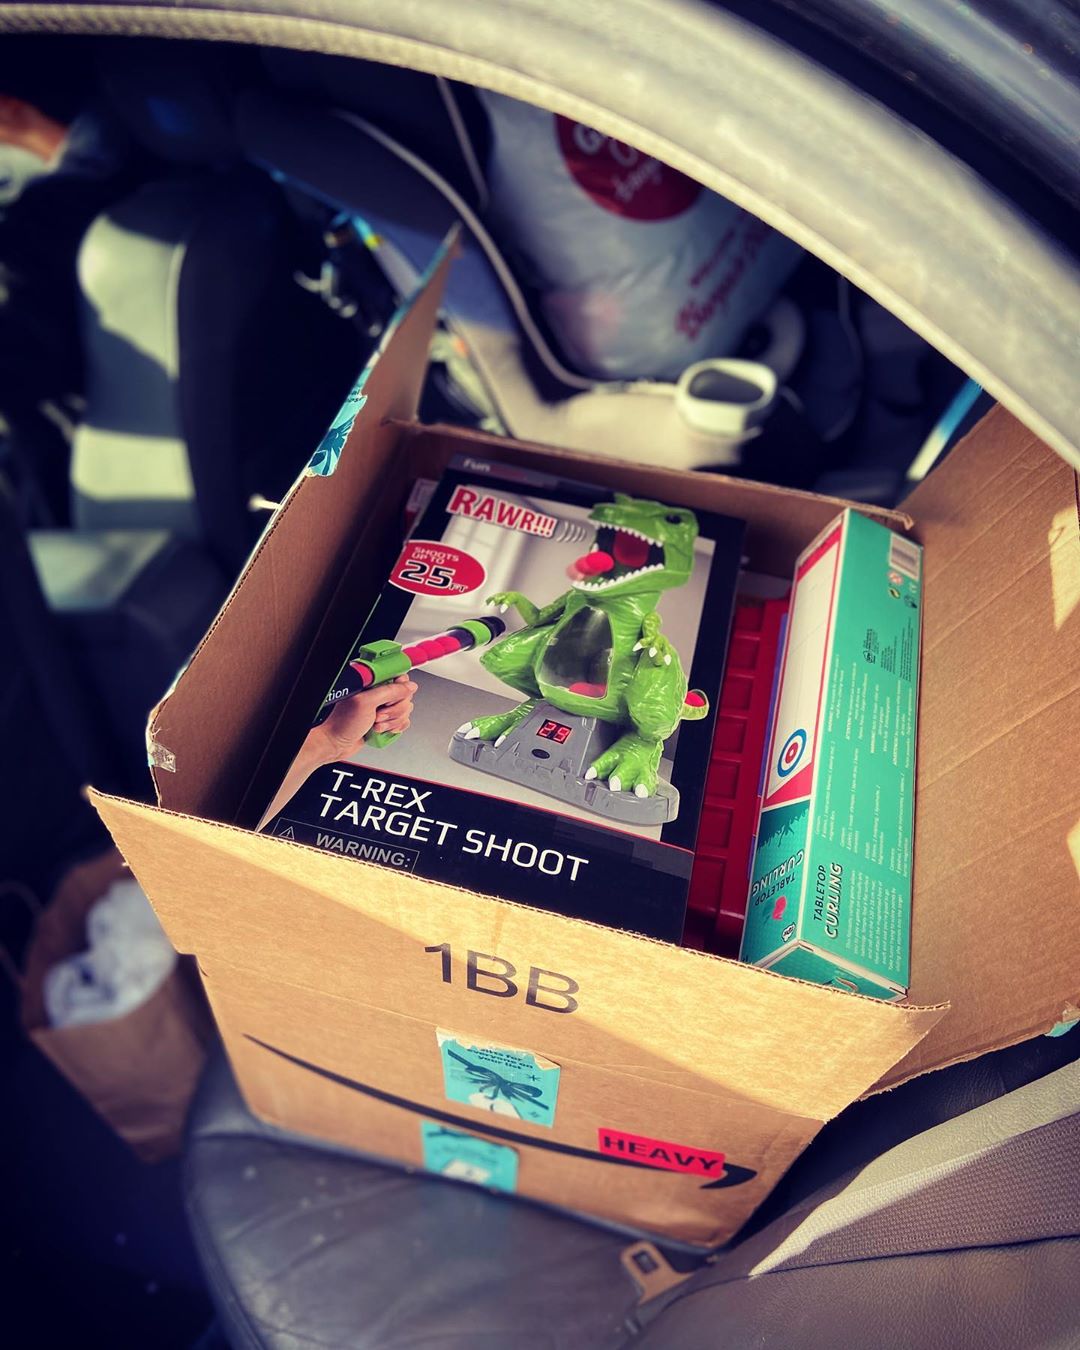 Box with Toys for Donation in Car. Photo by Instagram user @motogirly